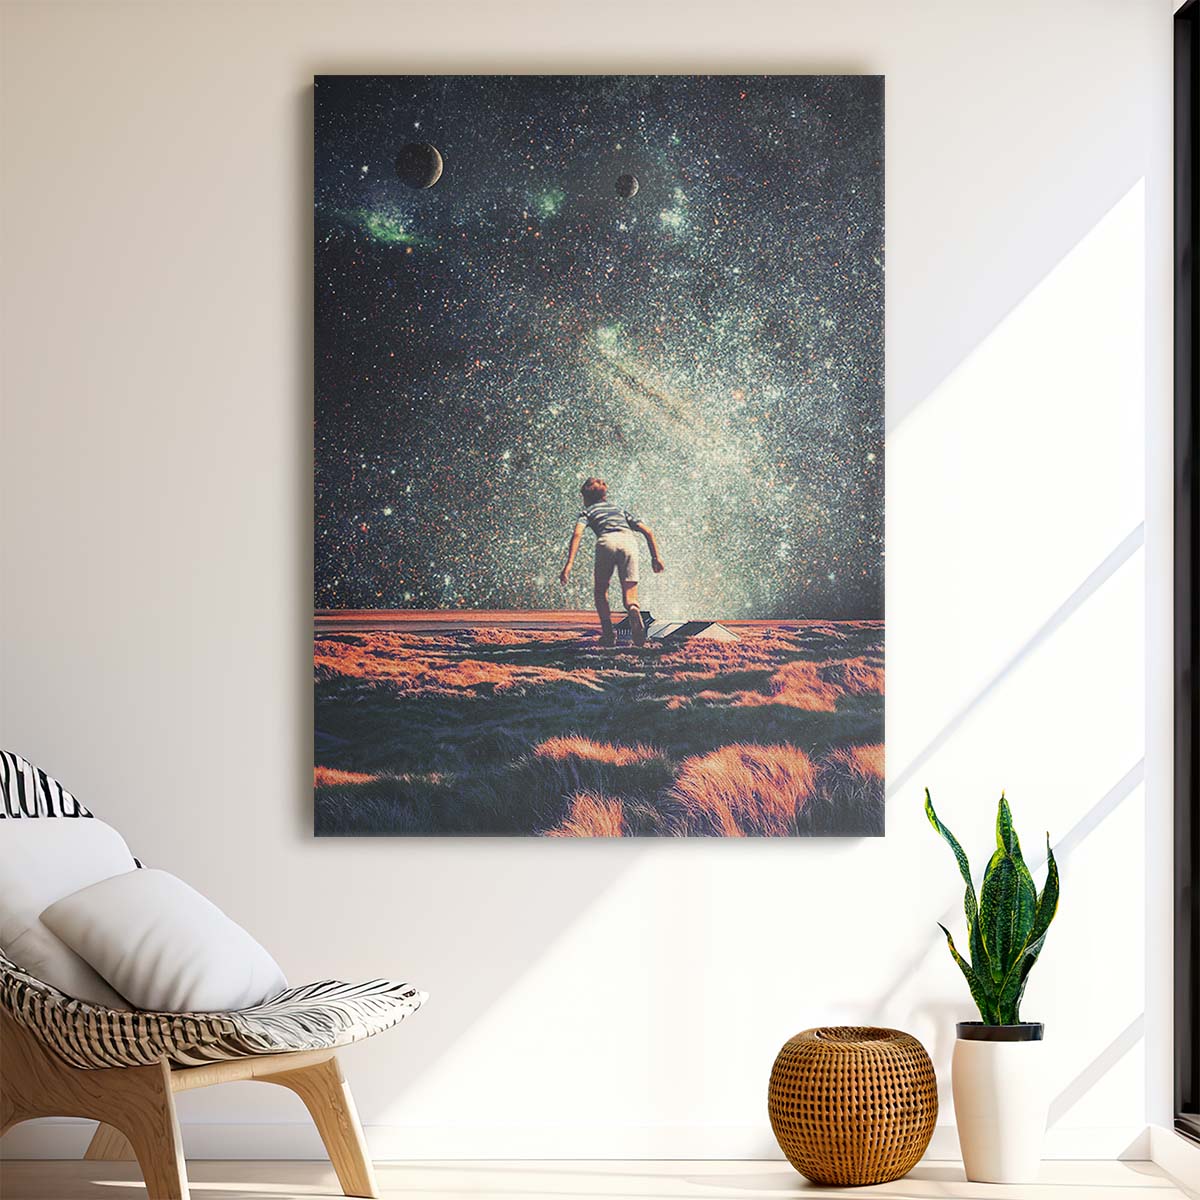 Child's Surreal Universe, Retro Futuristic Starry Night Digital Collage Art by Luxuriance Designs, made in USA